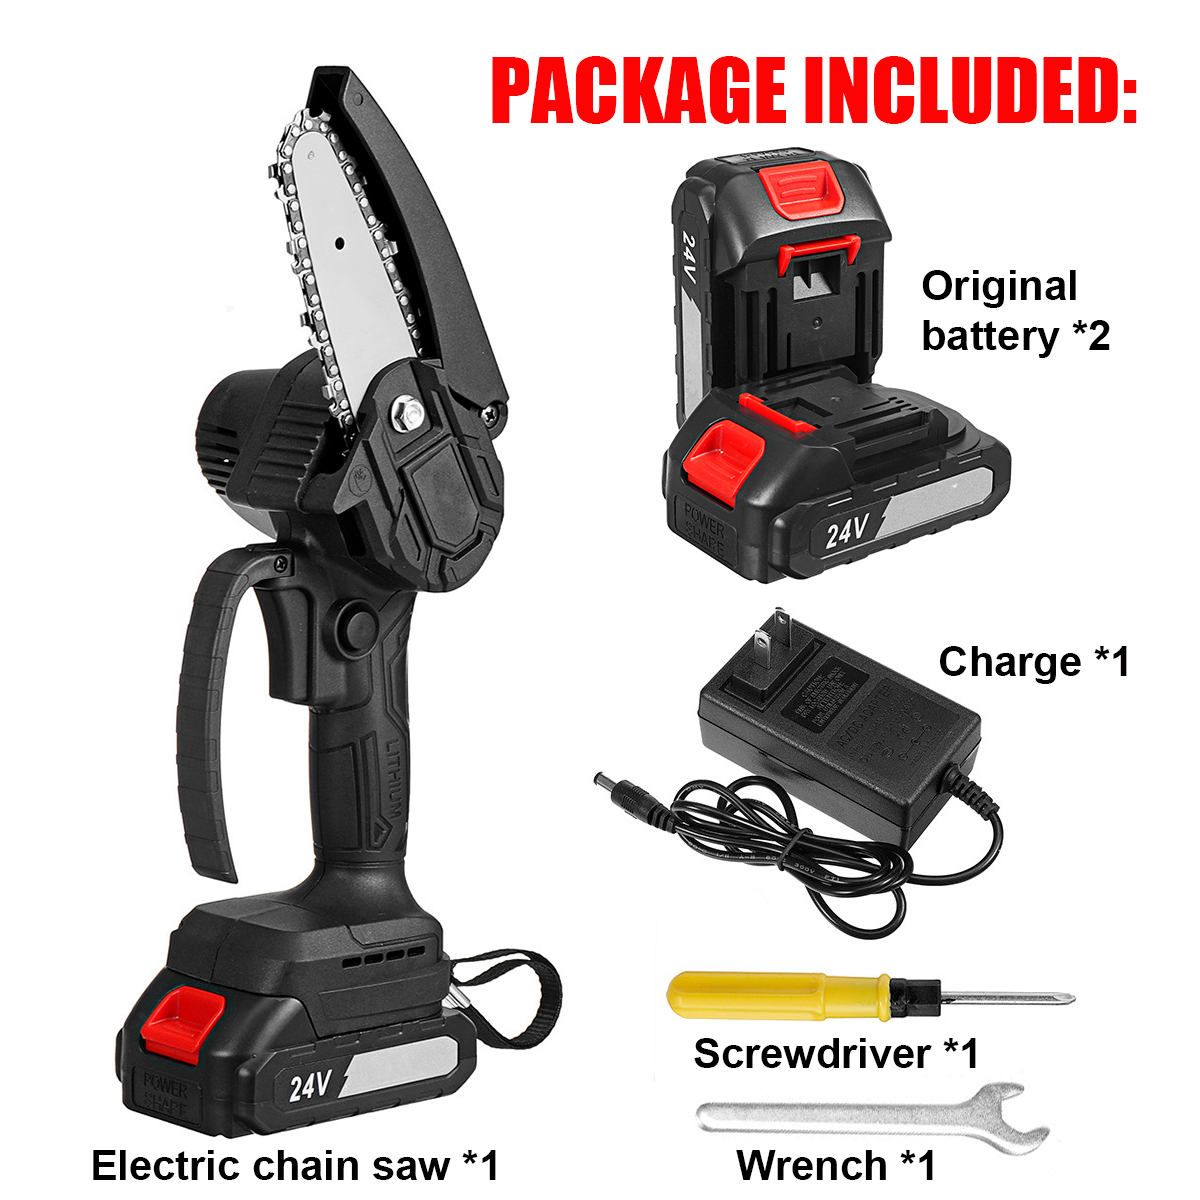 4inch-24V-Rechargeable-Brushless-Electric-Chain-Saw-Woodworking-Tool-Wood-Cutter-ChainSaws-W-12pcs-B-1858870-4